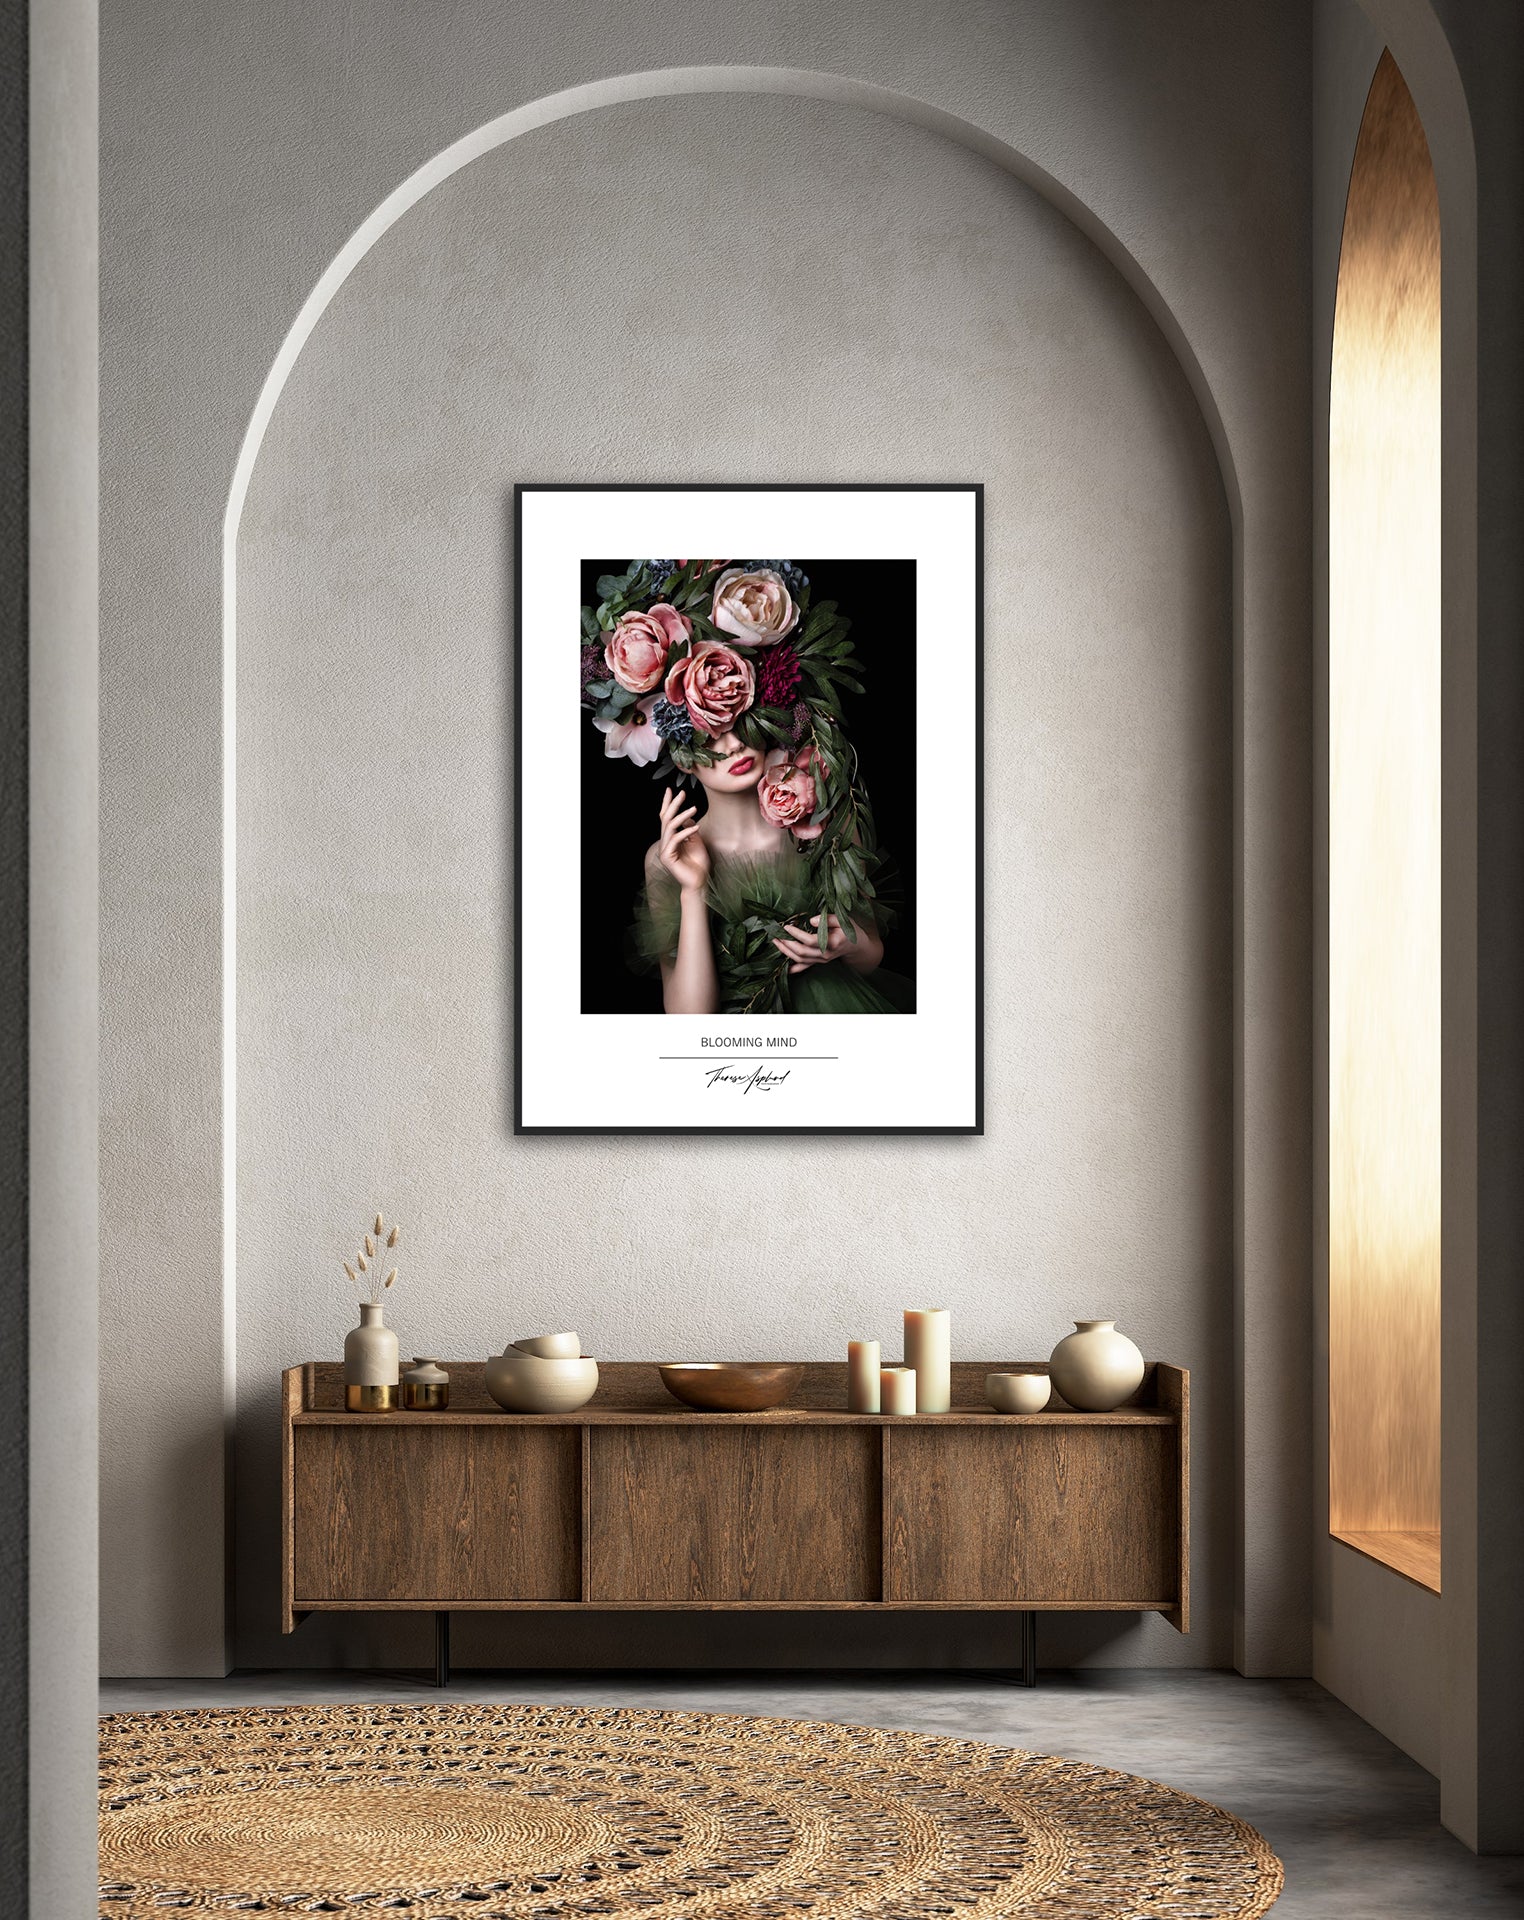 Art Poster 50x70 - BLOOMING MIND